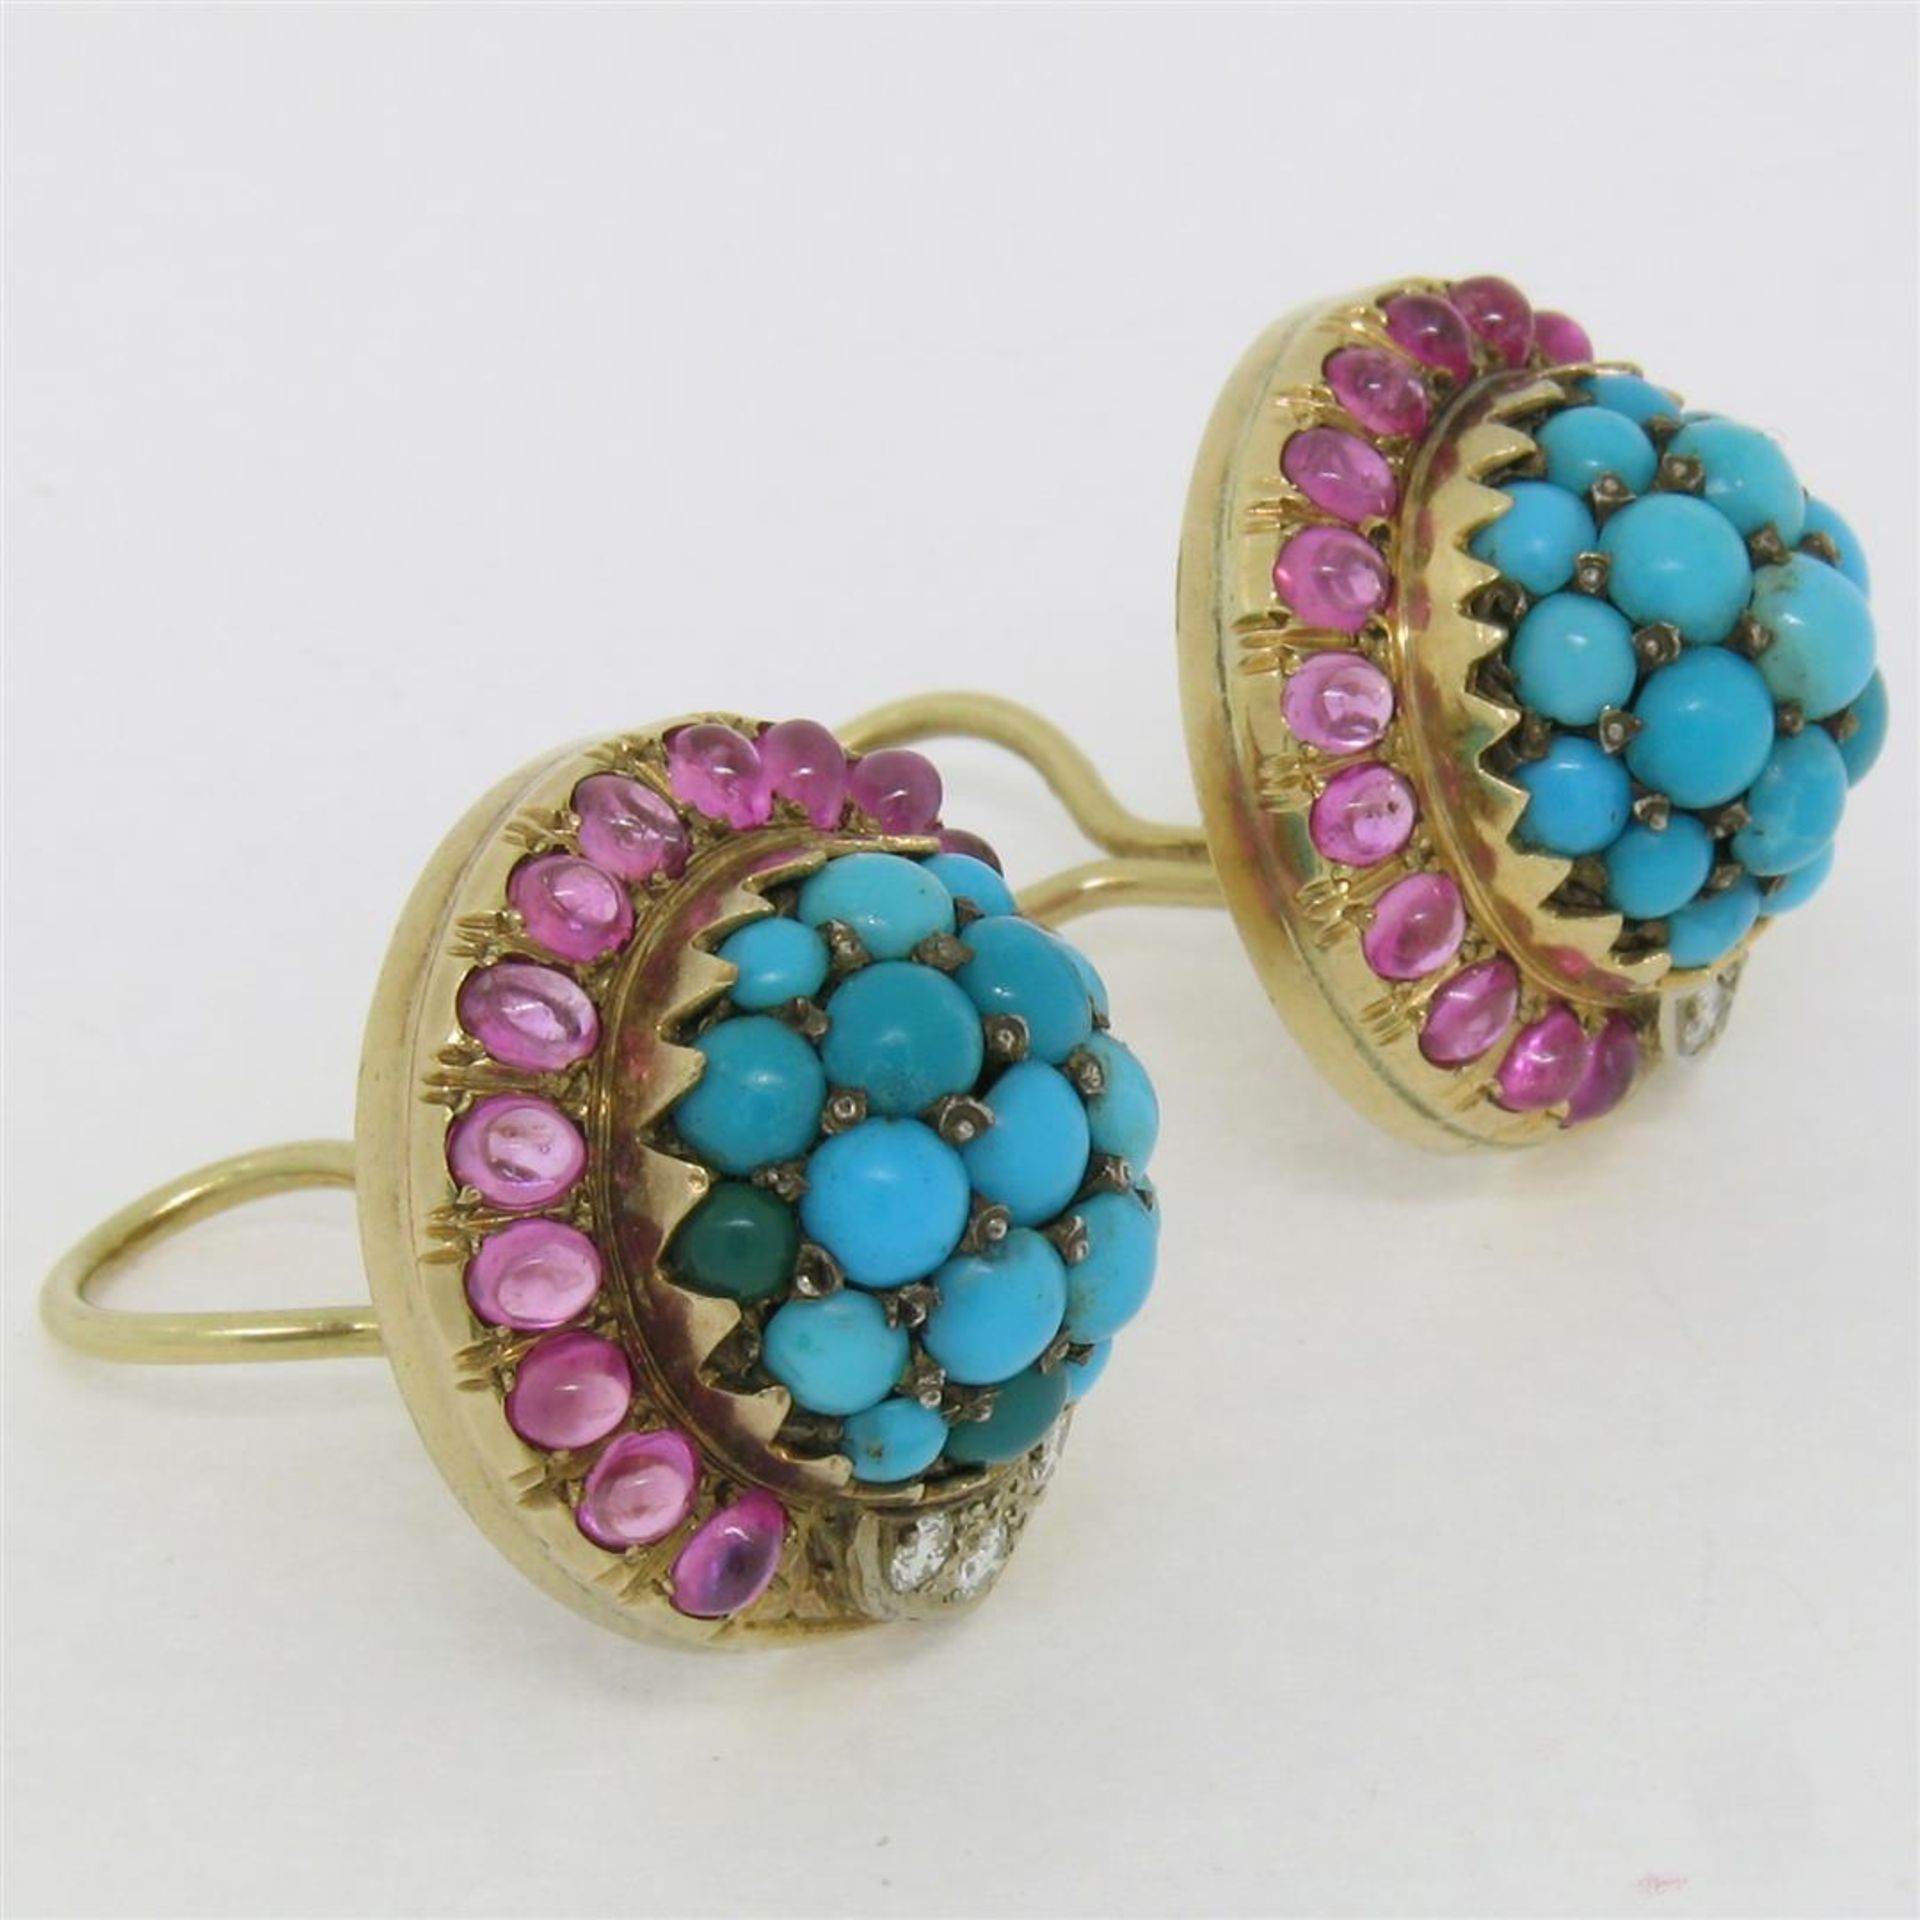 Vintage 14K Yellow Gold 3.56 ctw Turquoise Diamond & Ruby Cluster Button Earring - Image 3 of 9